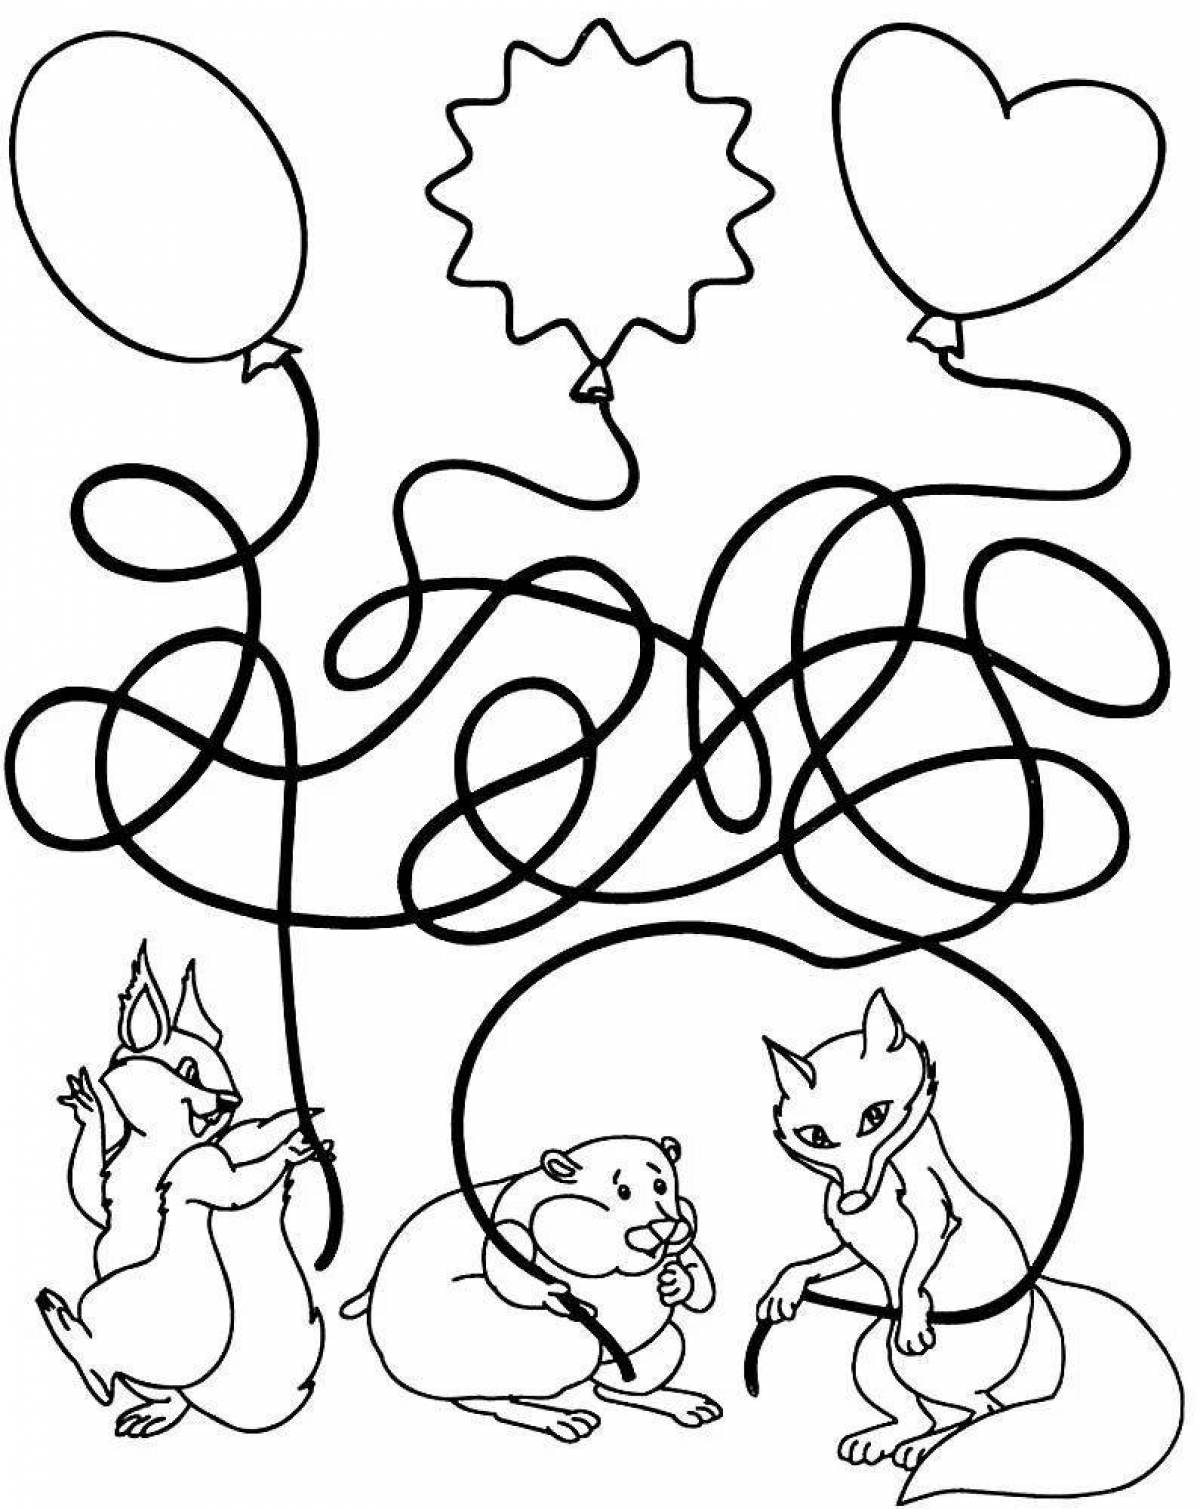 Magic Confusion Coloring Page